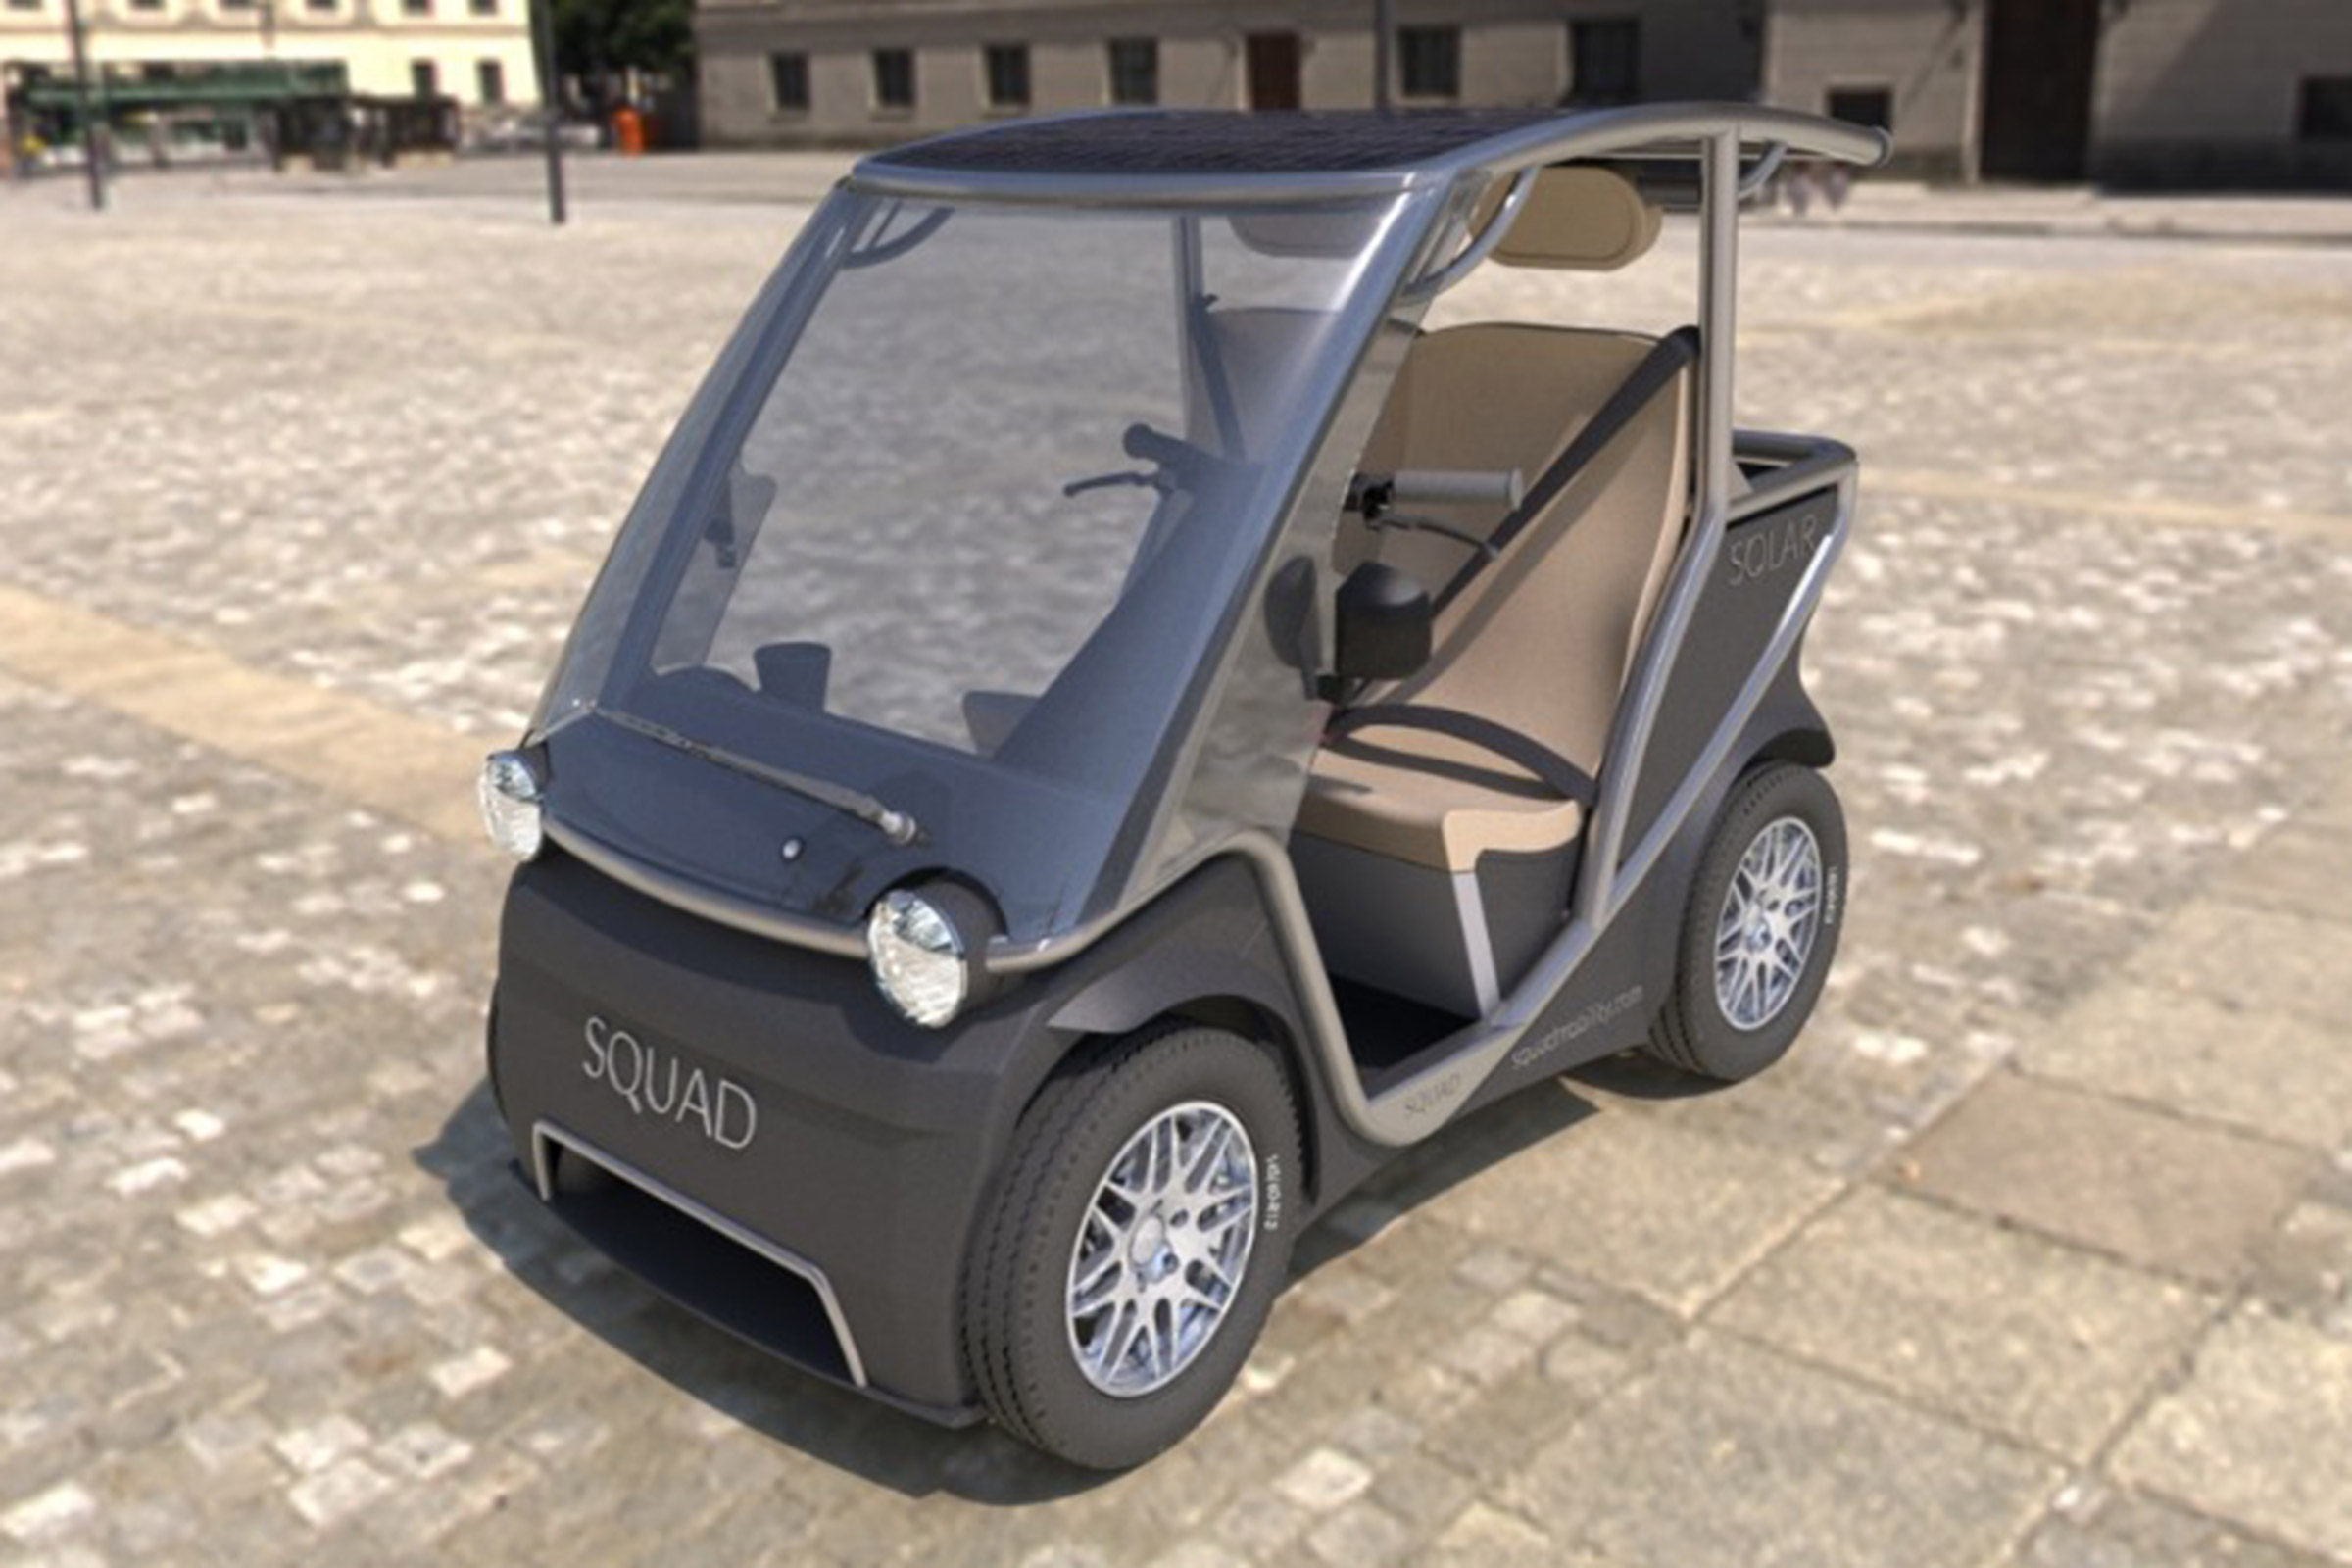 Squad Mobility launches new affordable solarpowered car Auto Express